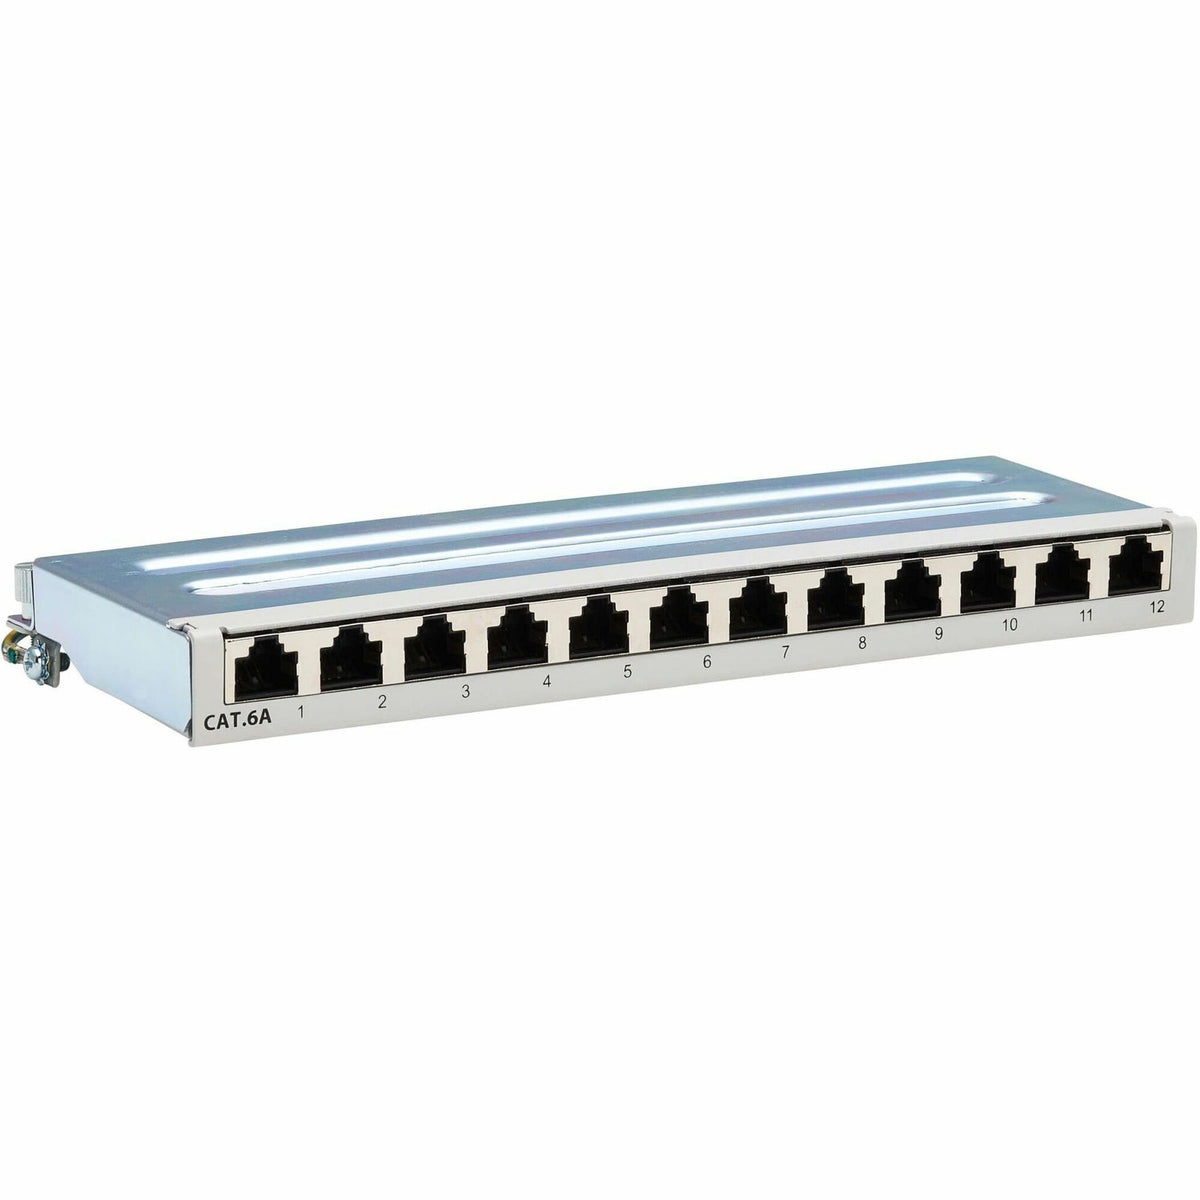 Tripp Lite by Eaton Cat6a STP Patch Panel, 12 Ports, DIN Rail or Wall Mount, TAA - N250-SH12-DIN6A